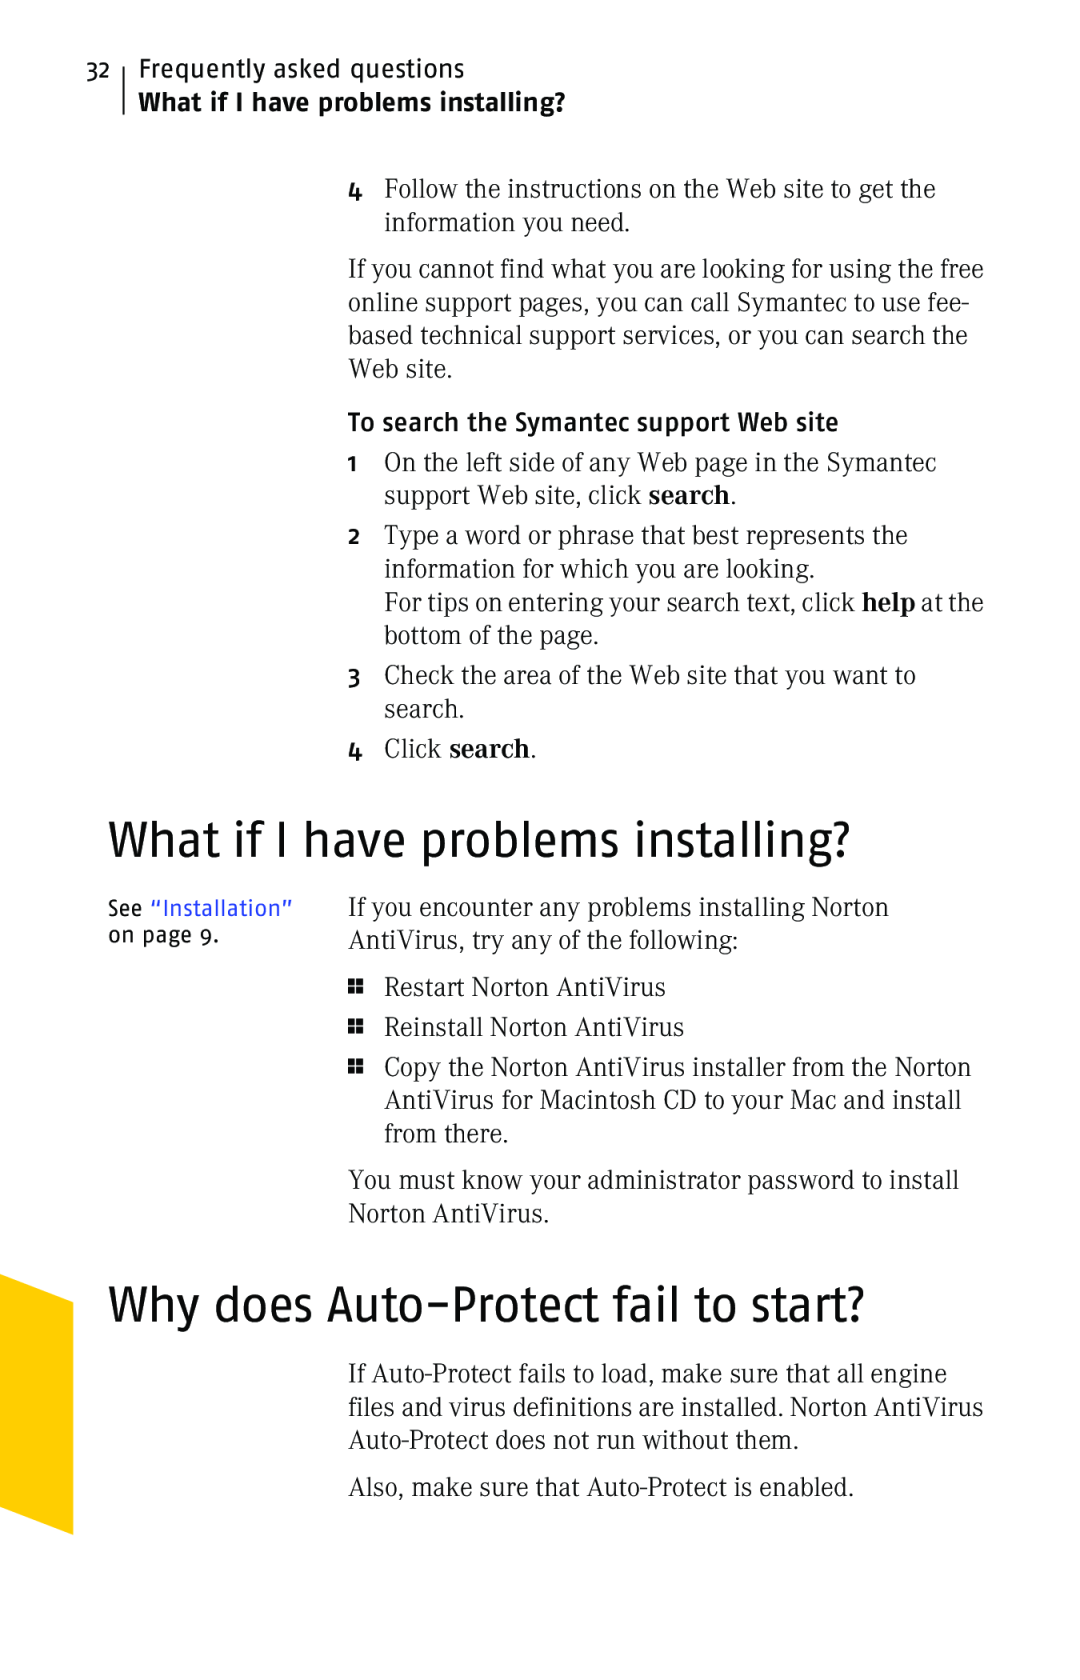 Symantec 10 manual What if I have problems installing?, Why does Auto-Protectfail to start? 